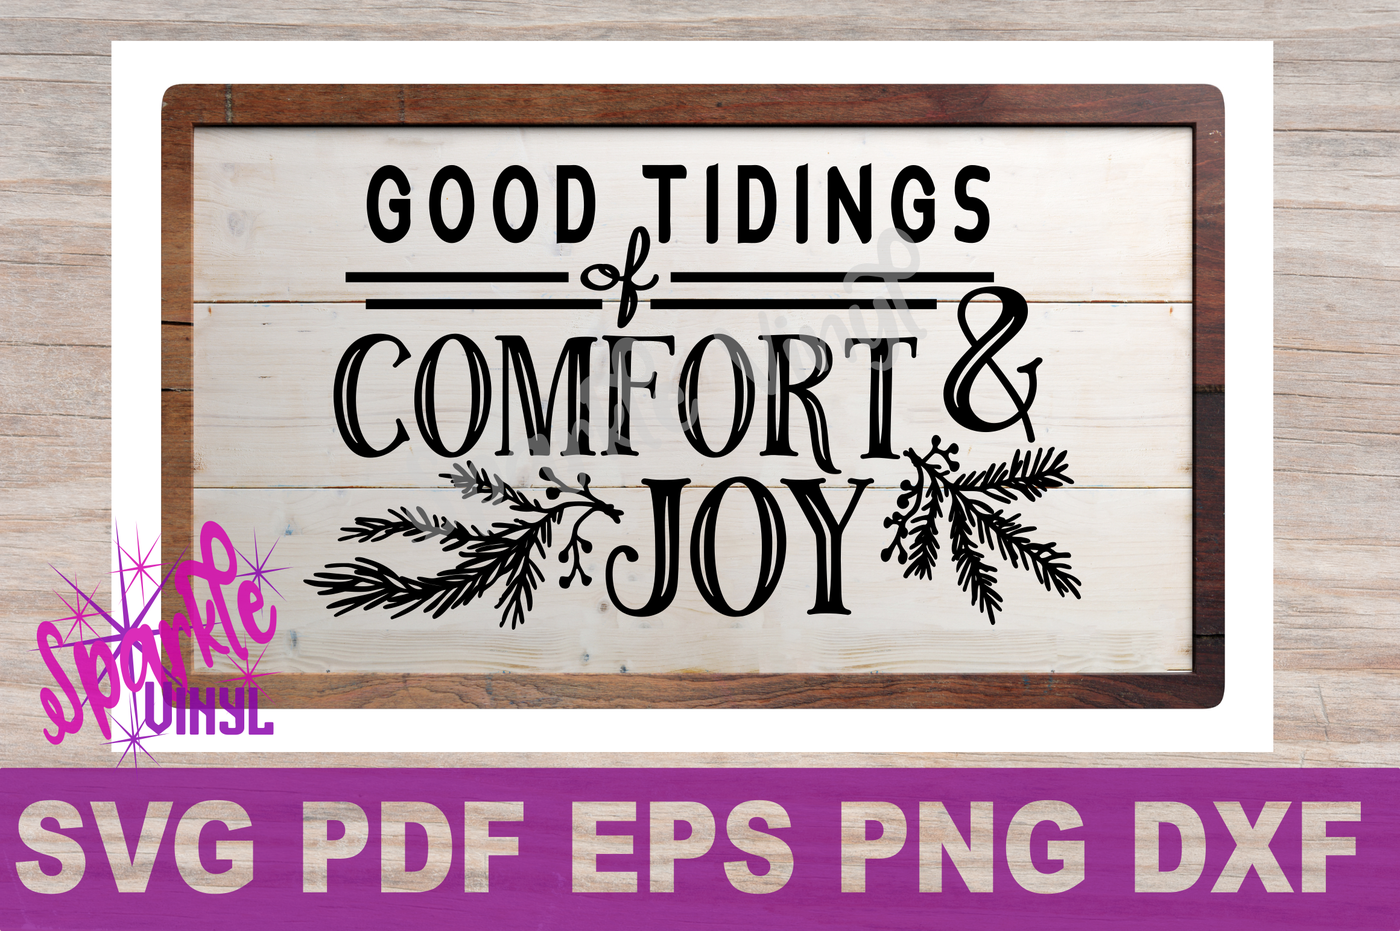 ori 107454 2fea5b191a9e6bfa83118ed8b4c27ba41c3656ca svg christmas comfort and joy diy sign stencil farmhouse style printable or svg cutting files for cricut sihouette